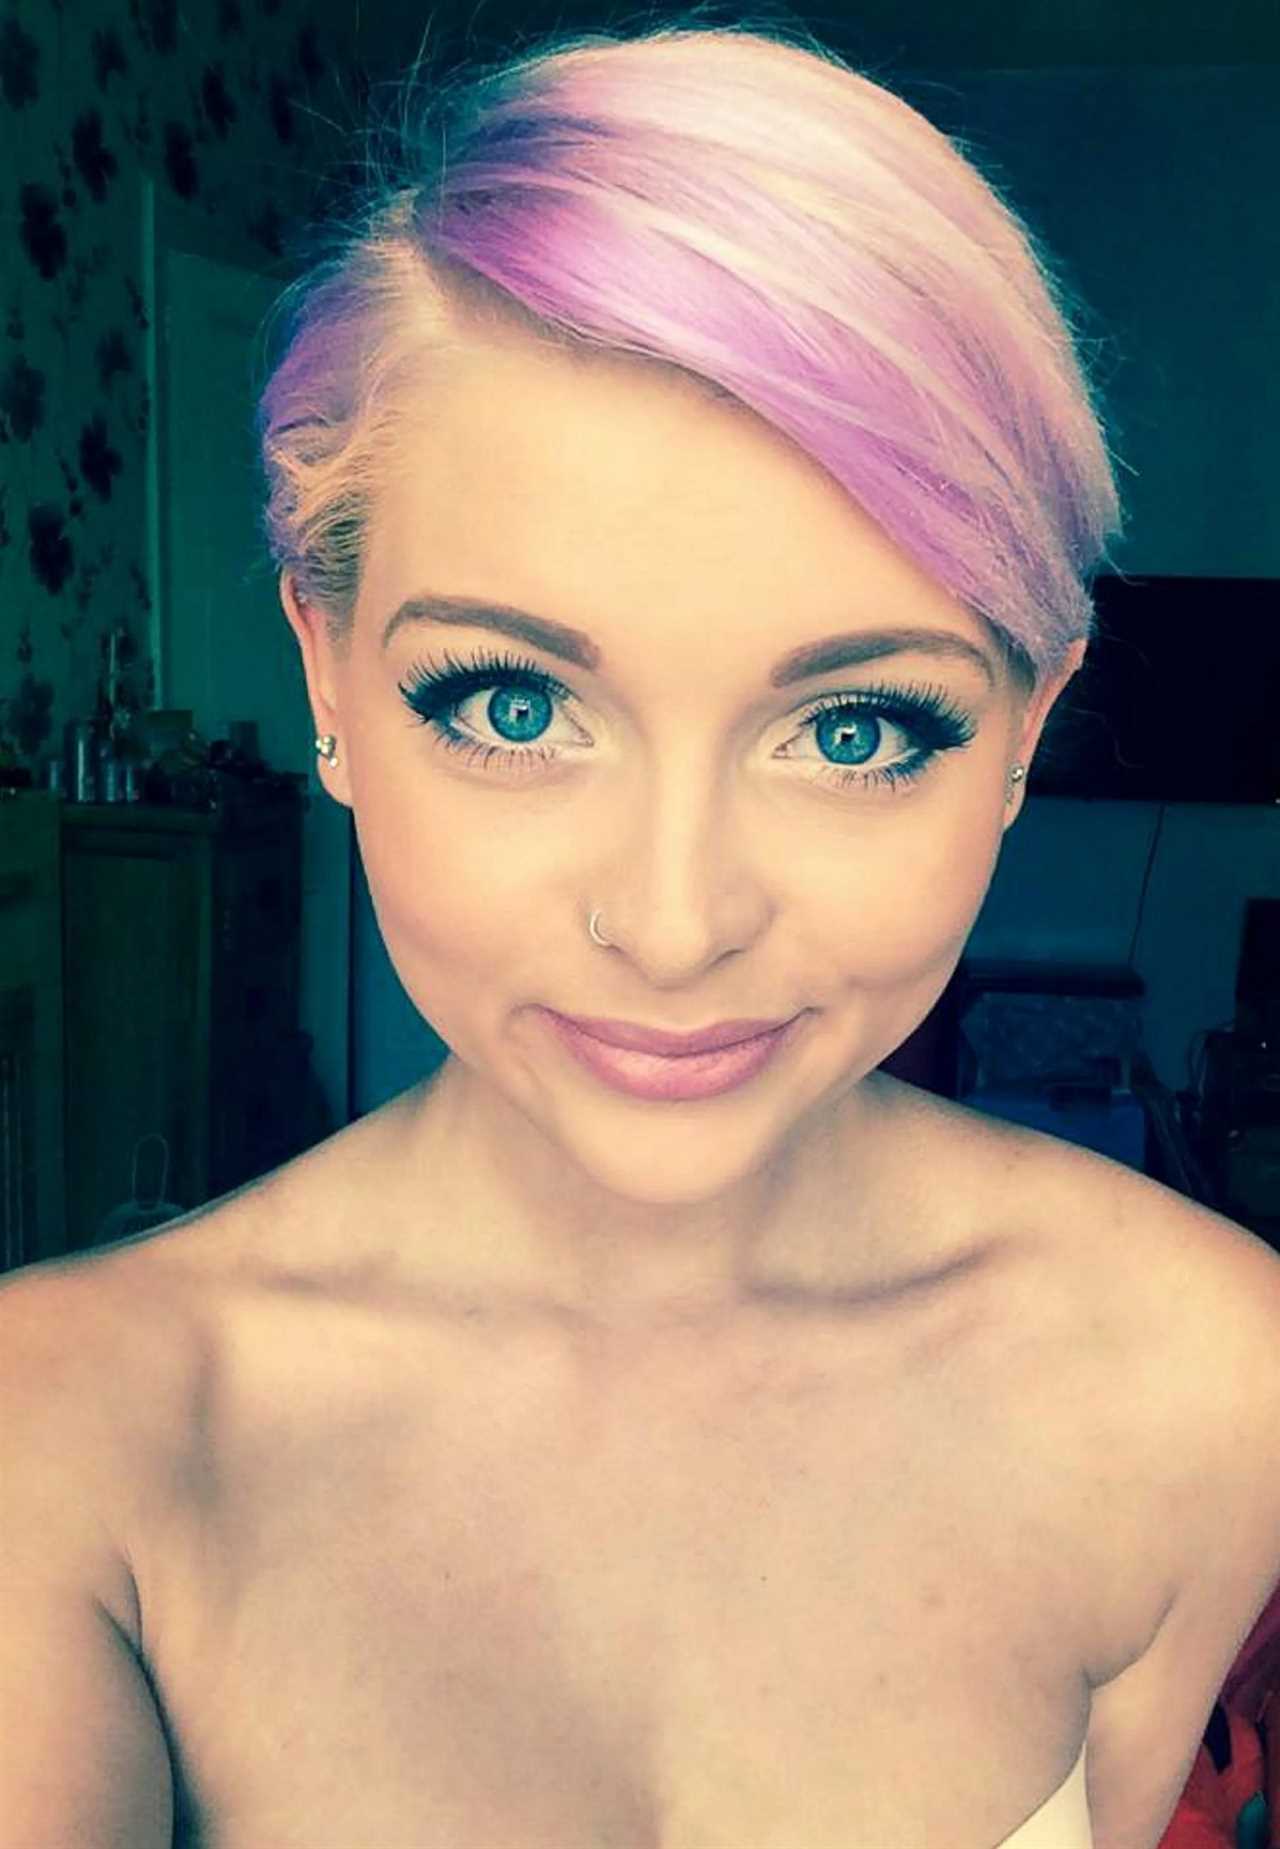 Aspiring model, 27, died of cervical cancer just four months after doctor said her hormones were to blame